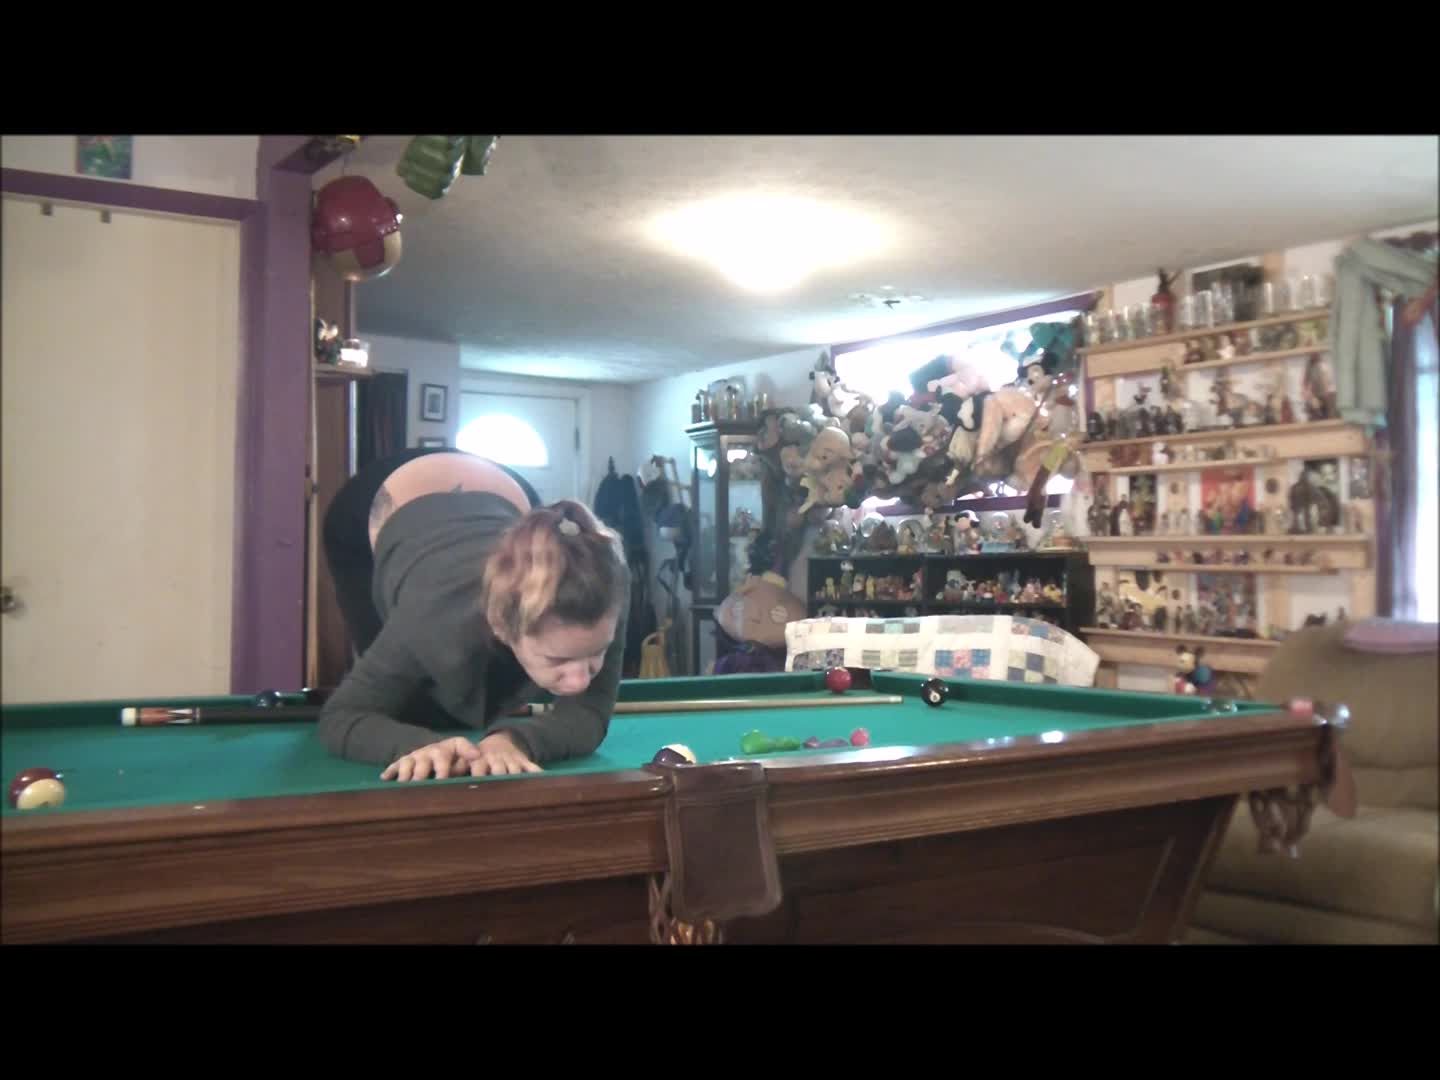 Pool Table Balloon Madness